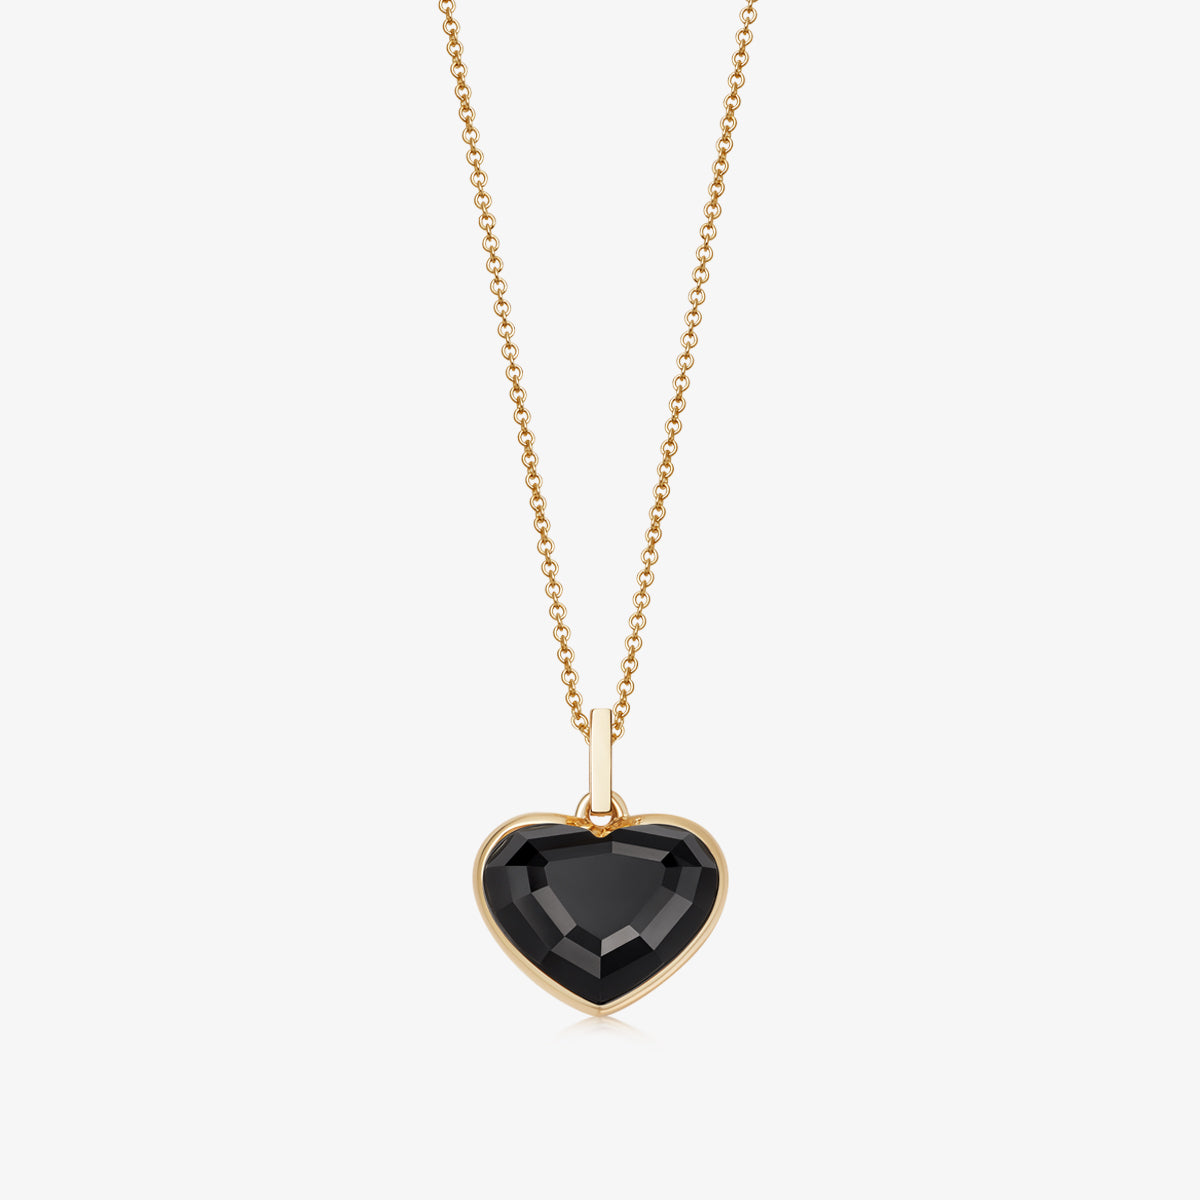 Buy Black Onyx Heart Pendant Necklace/black Stone Heart Charm Necklace/box  Chain/sterling Silver/handmade in Usa/heart Jewelry Online in India - Etsy